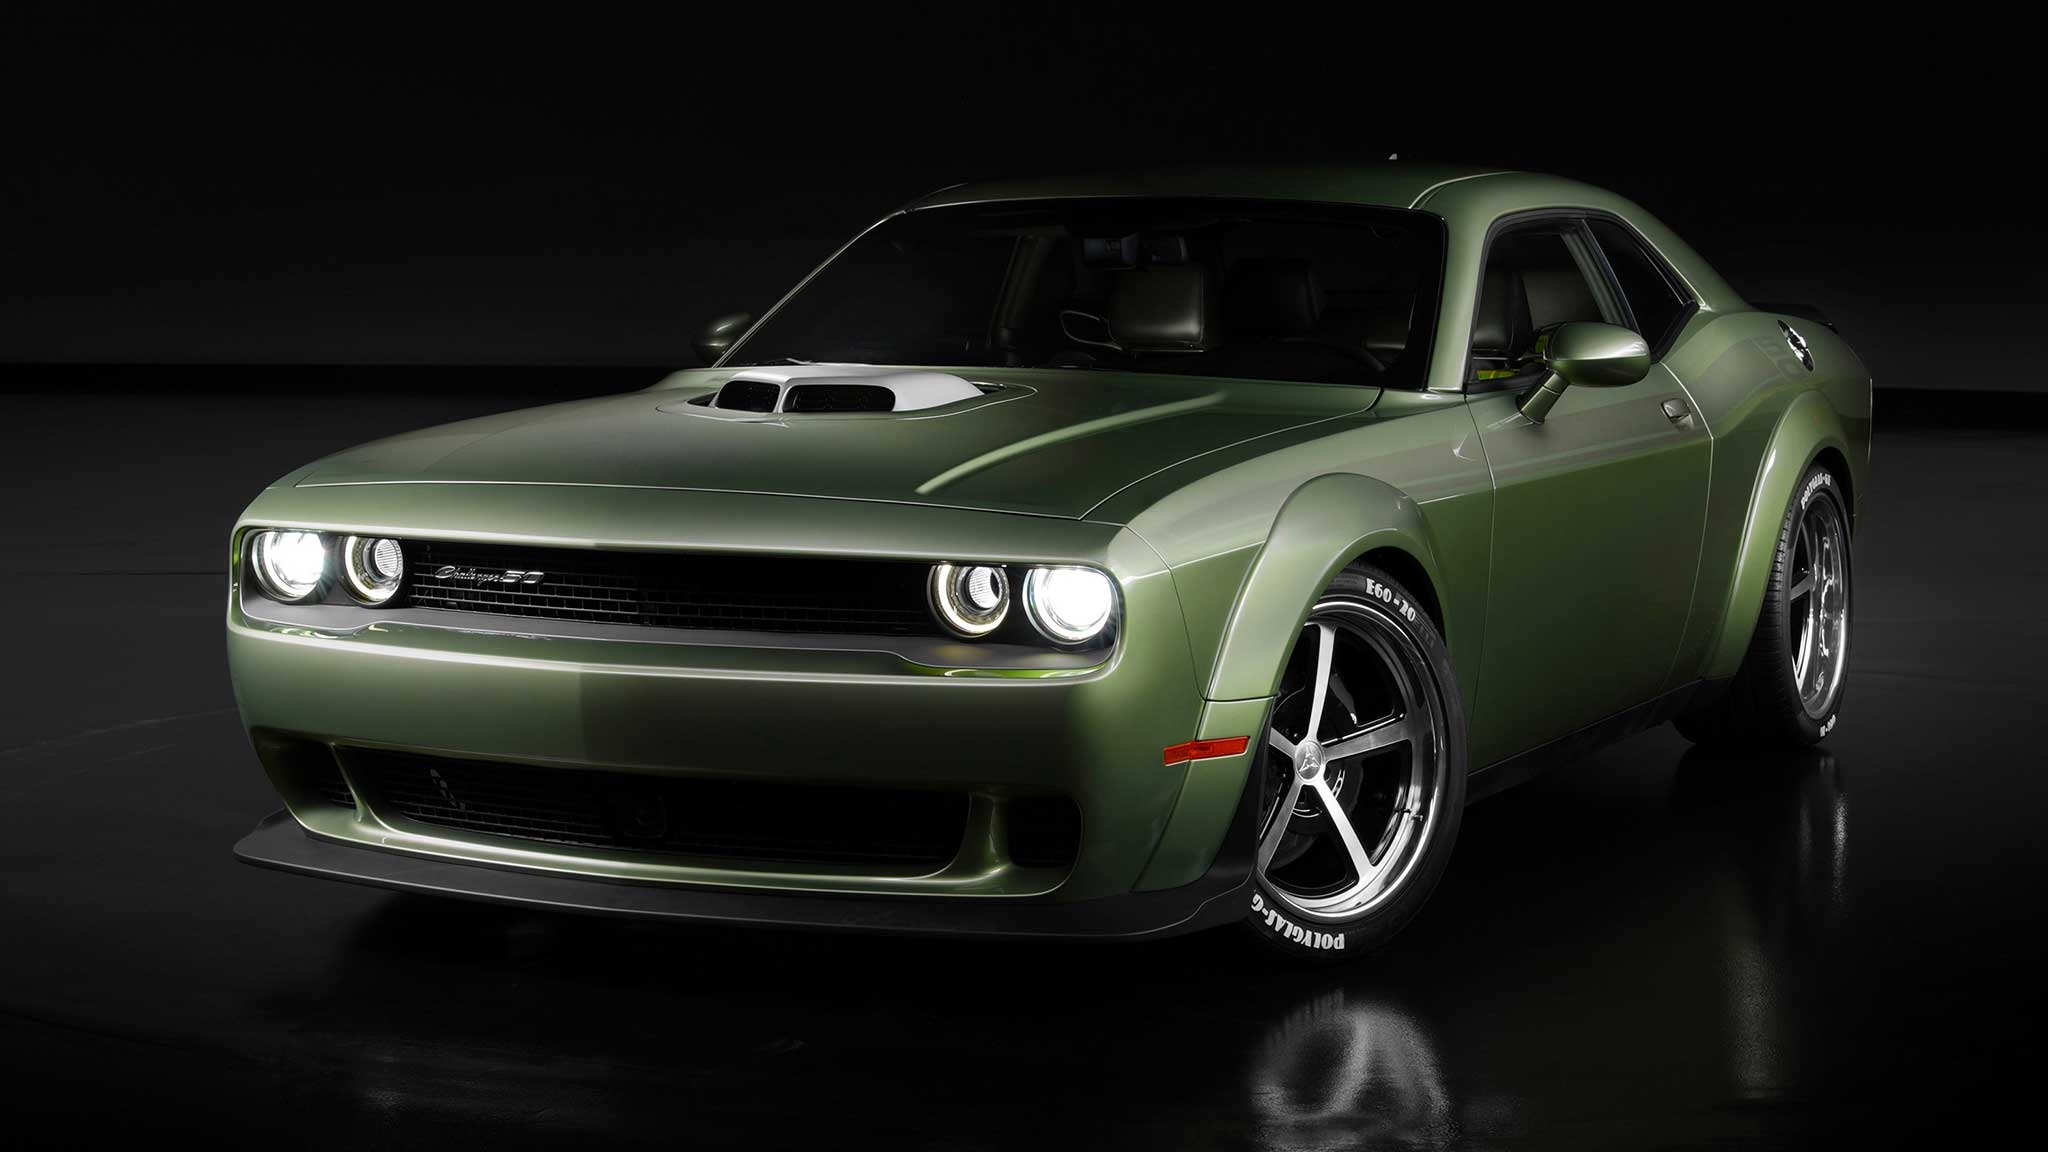 Dodge’s Holy Guacamole Dodge Challenger R/T Scat Pack Widebody on Forgeline Forged Three Piece FL500 Wheel